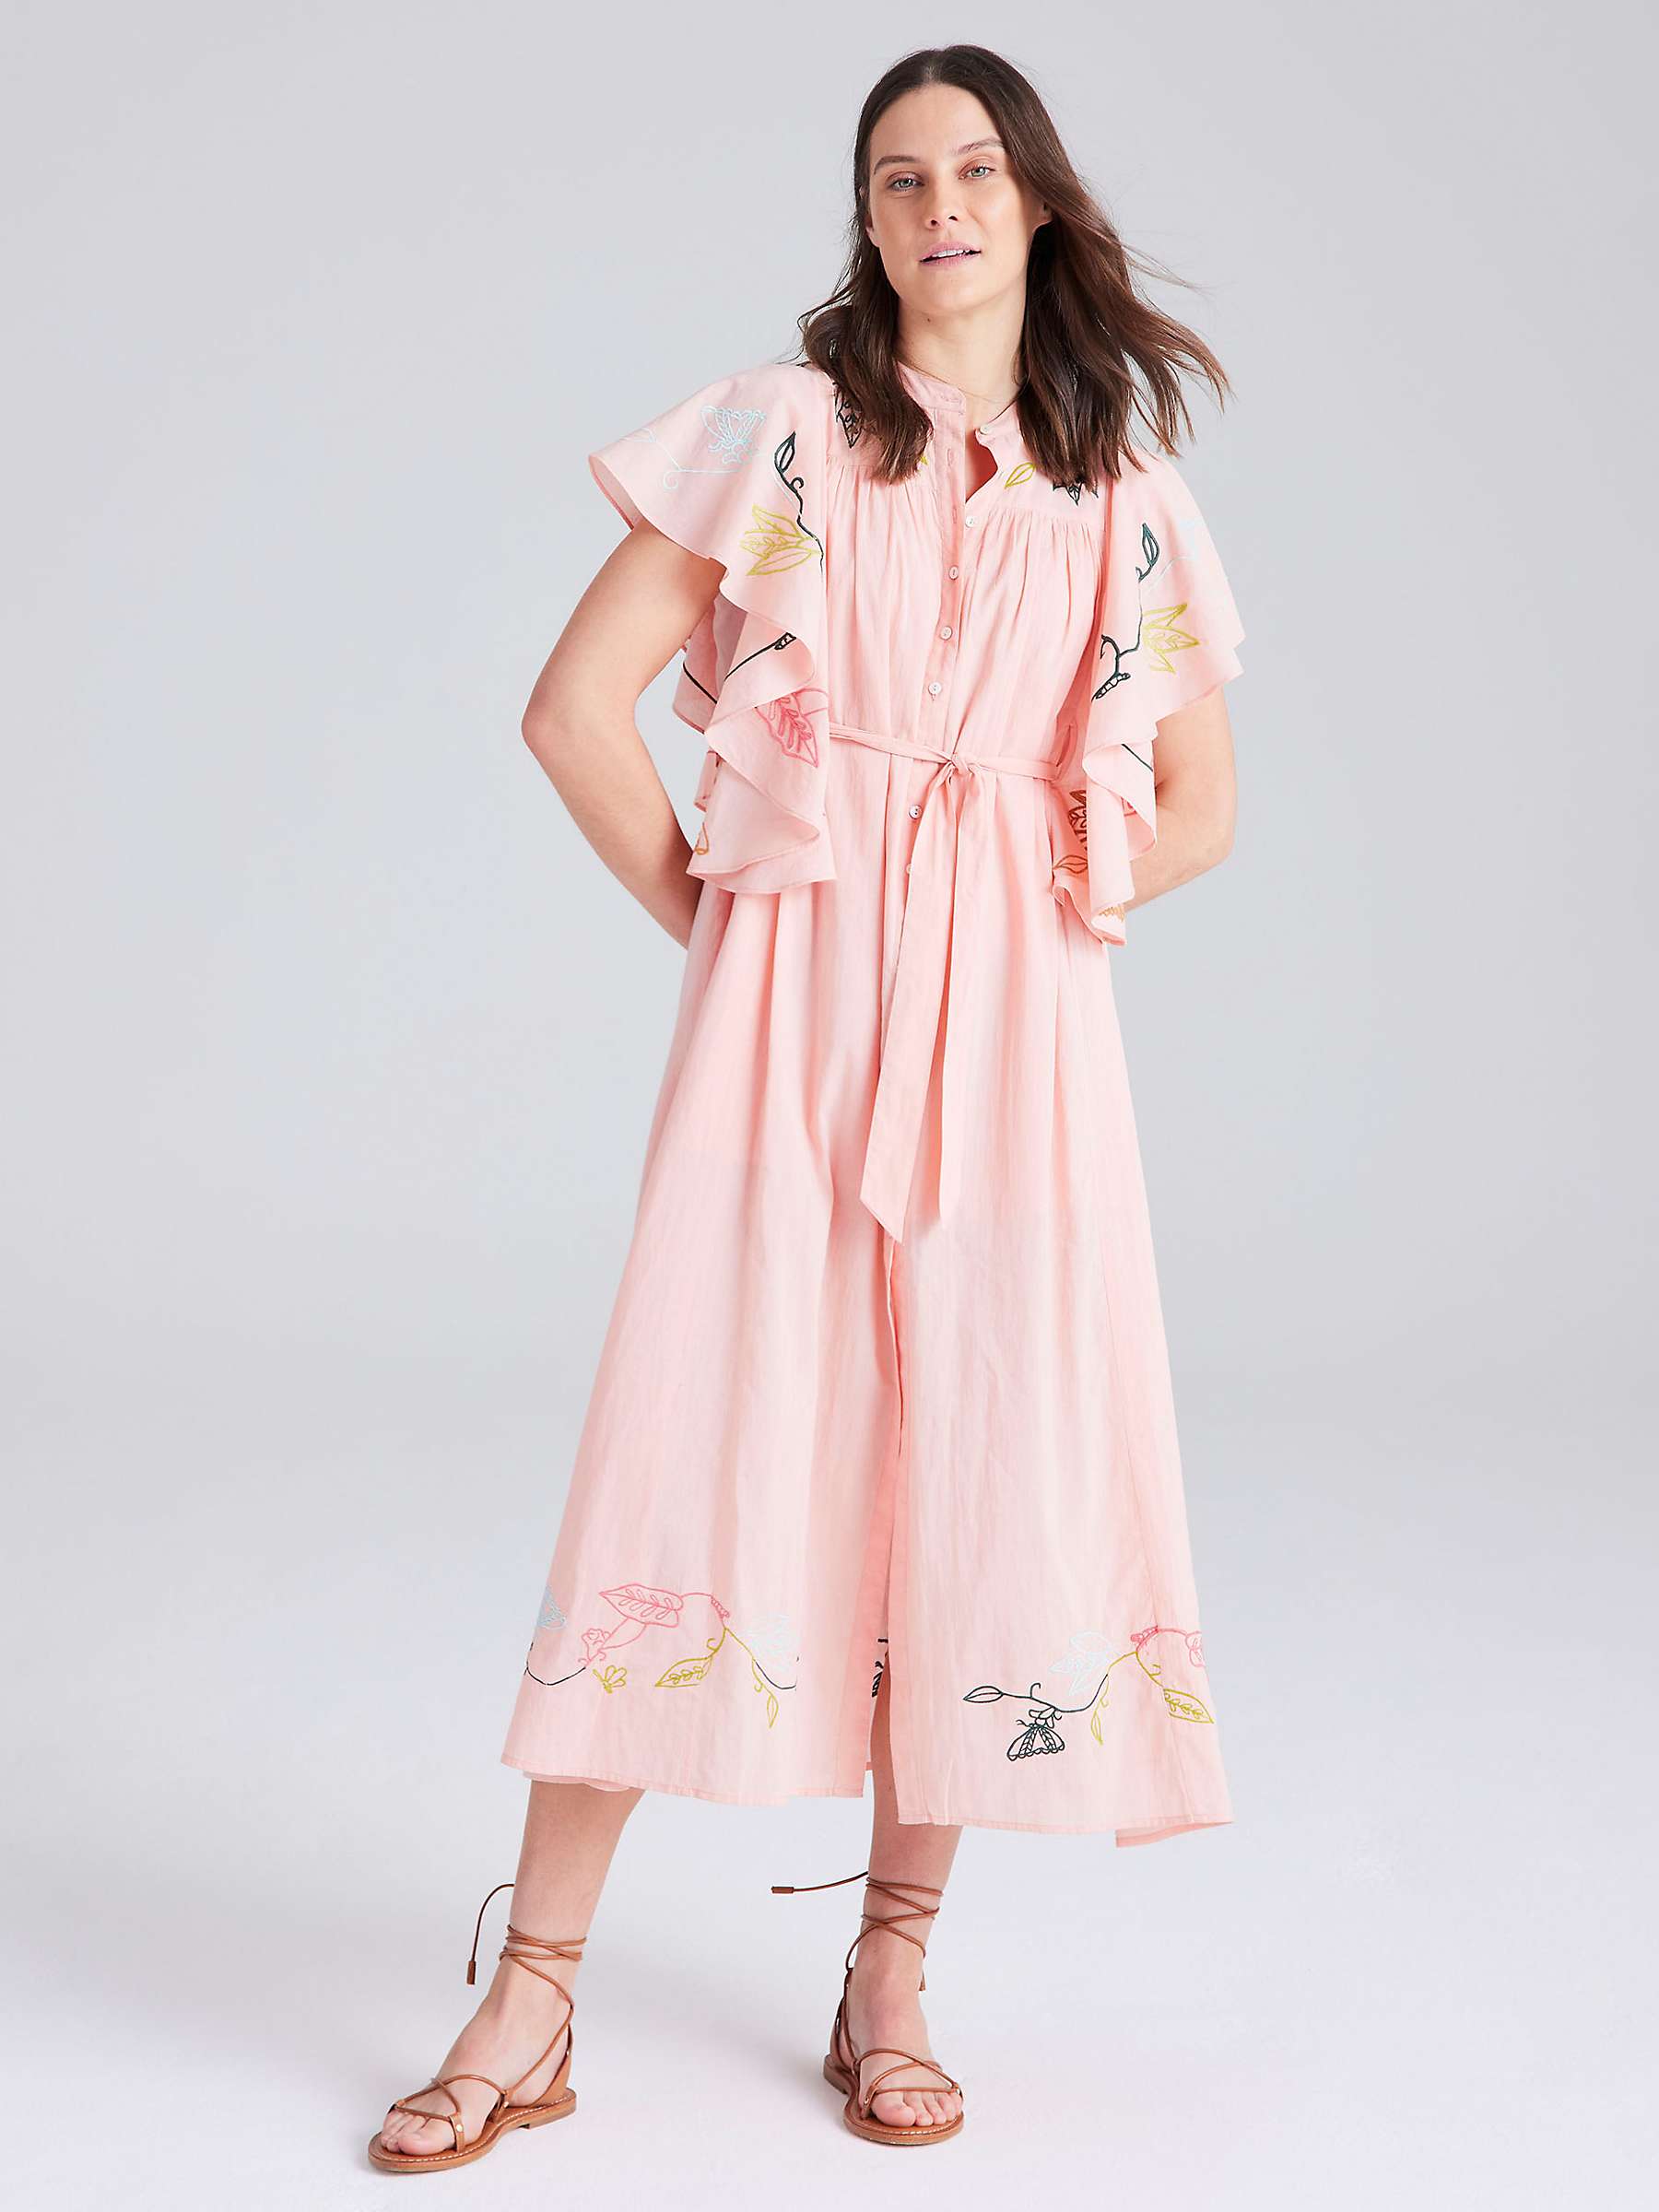 Buy Cape Cove Botanical Embroidered Ruffle Midi Dress, Dubarry Online at johnlewis.com